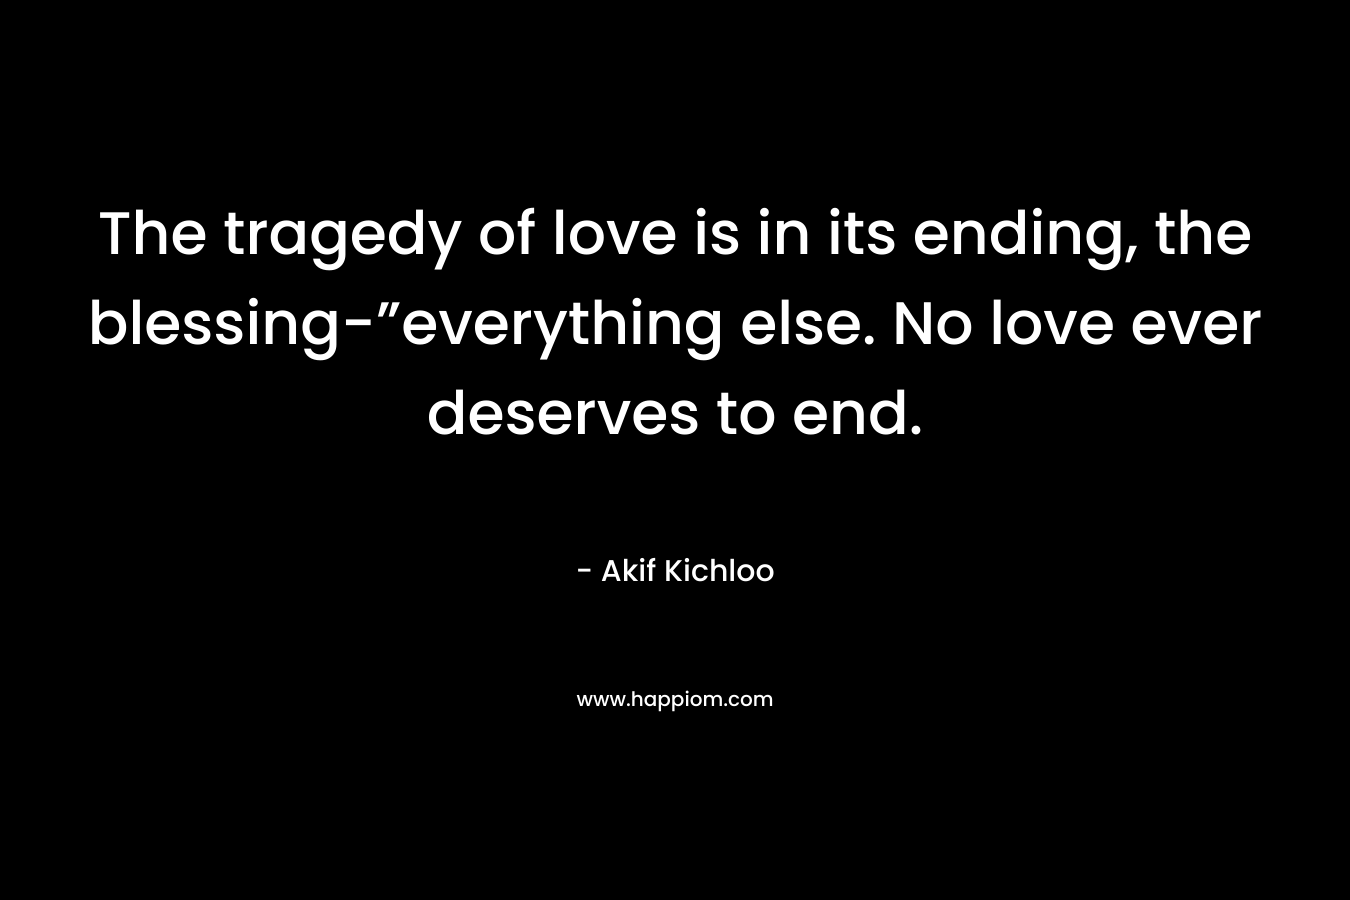 The tragedy of love is in its ending, the blessing-”everything else. No love ever deserves to end. – Akif Kichloo